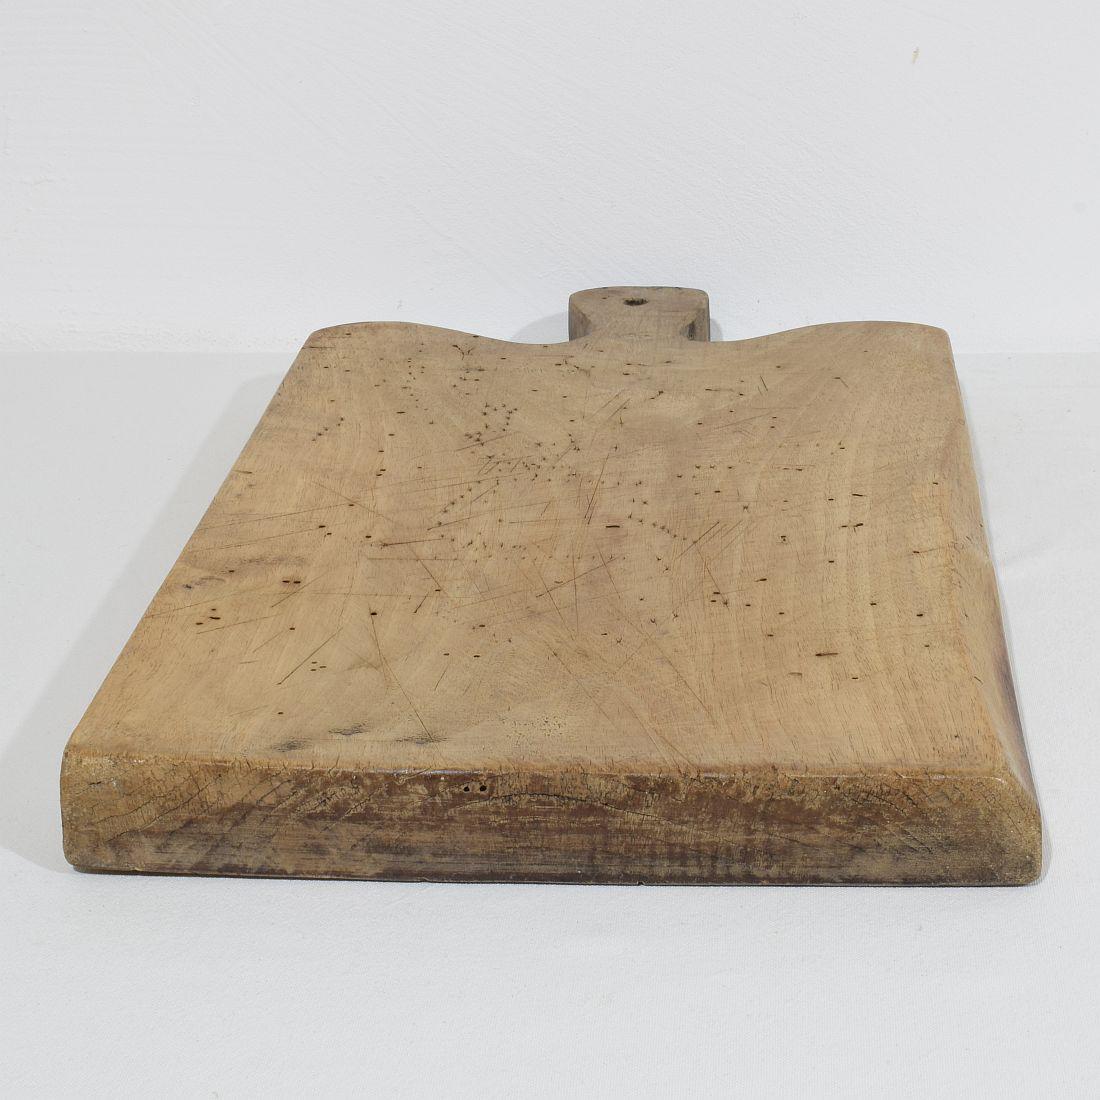 Collection of Three Rare French, 19th Century, Wooden Chopping or Cutting Boards 11